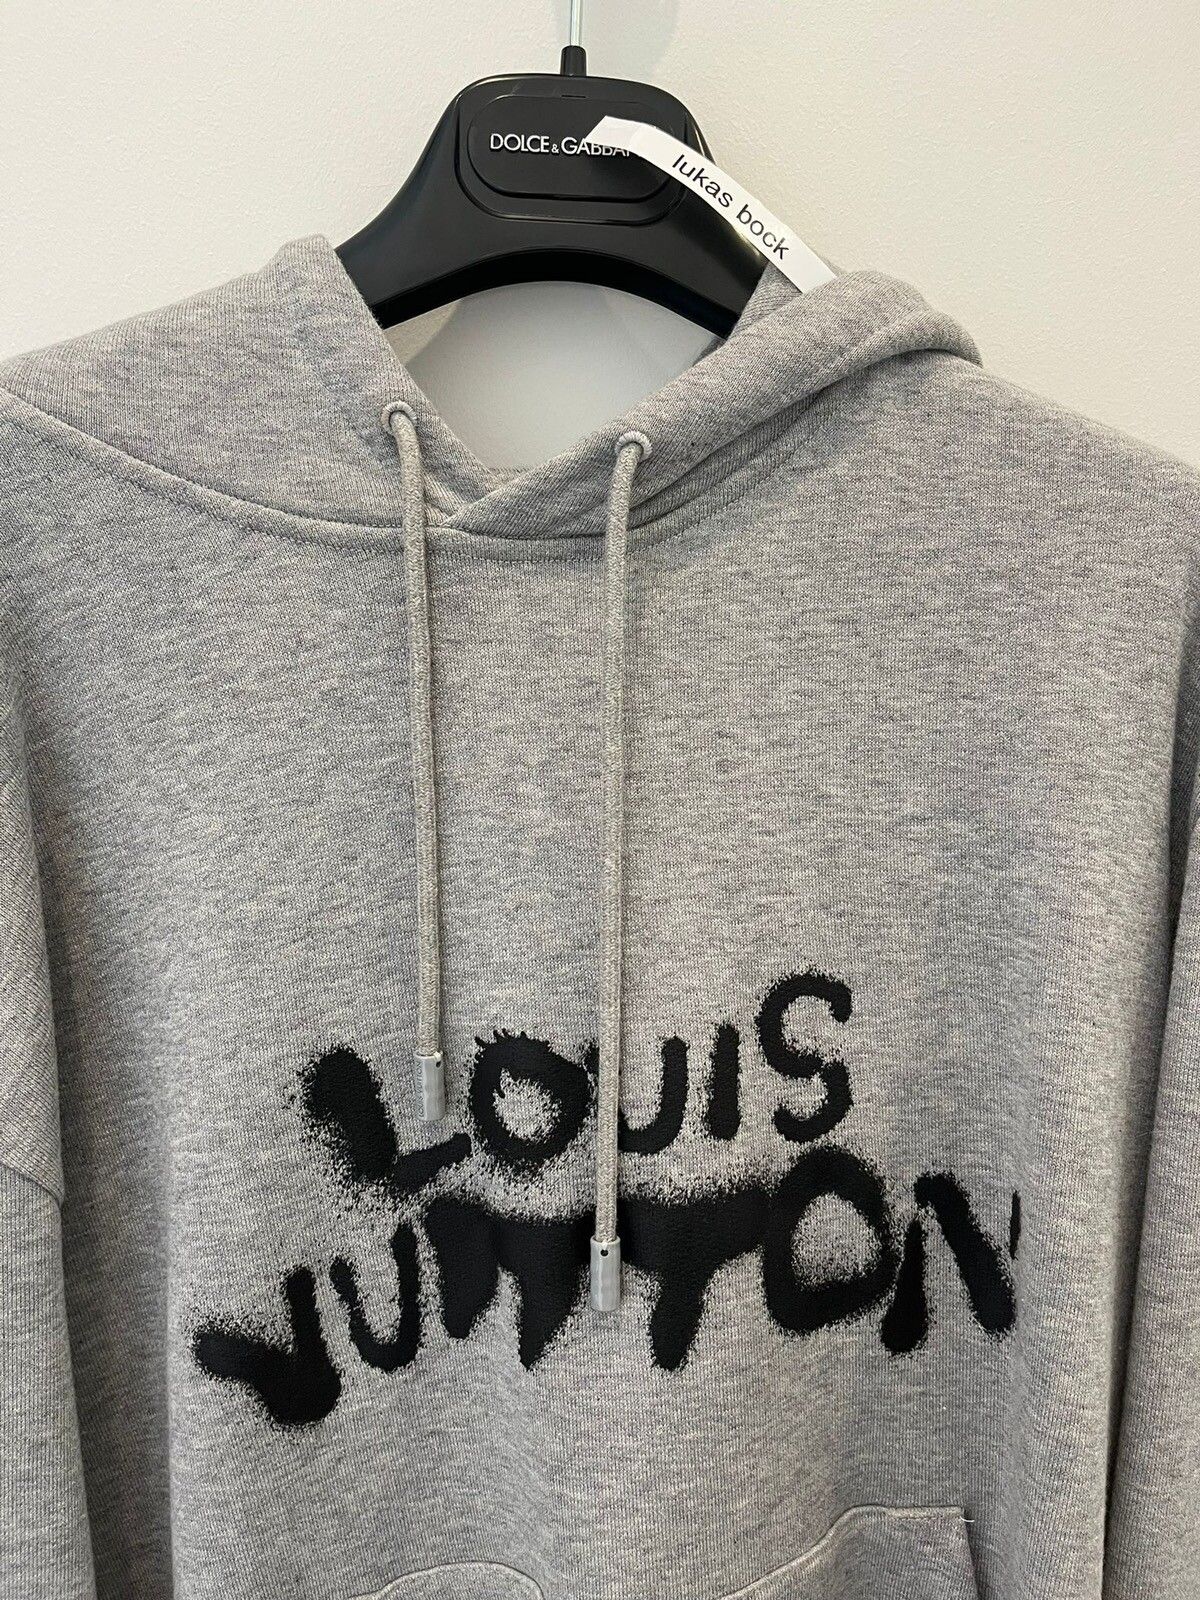 LOUIS VUITTON(ルイヴィトン) / パーカー/Neon Working Man Hoodie/コットン/GRY/RM212 UYR  HLY68W